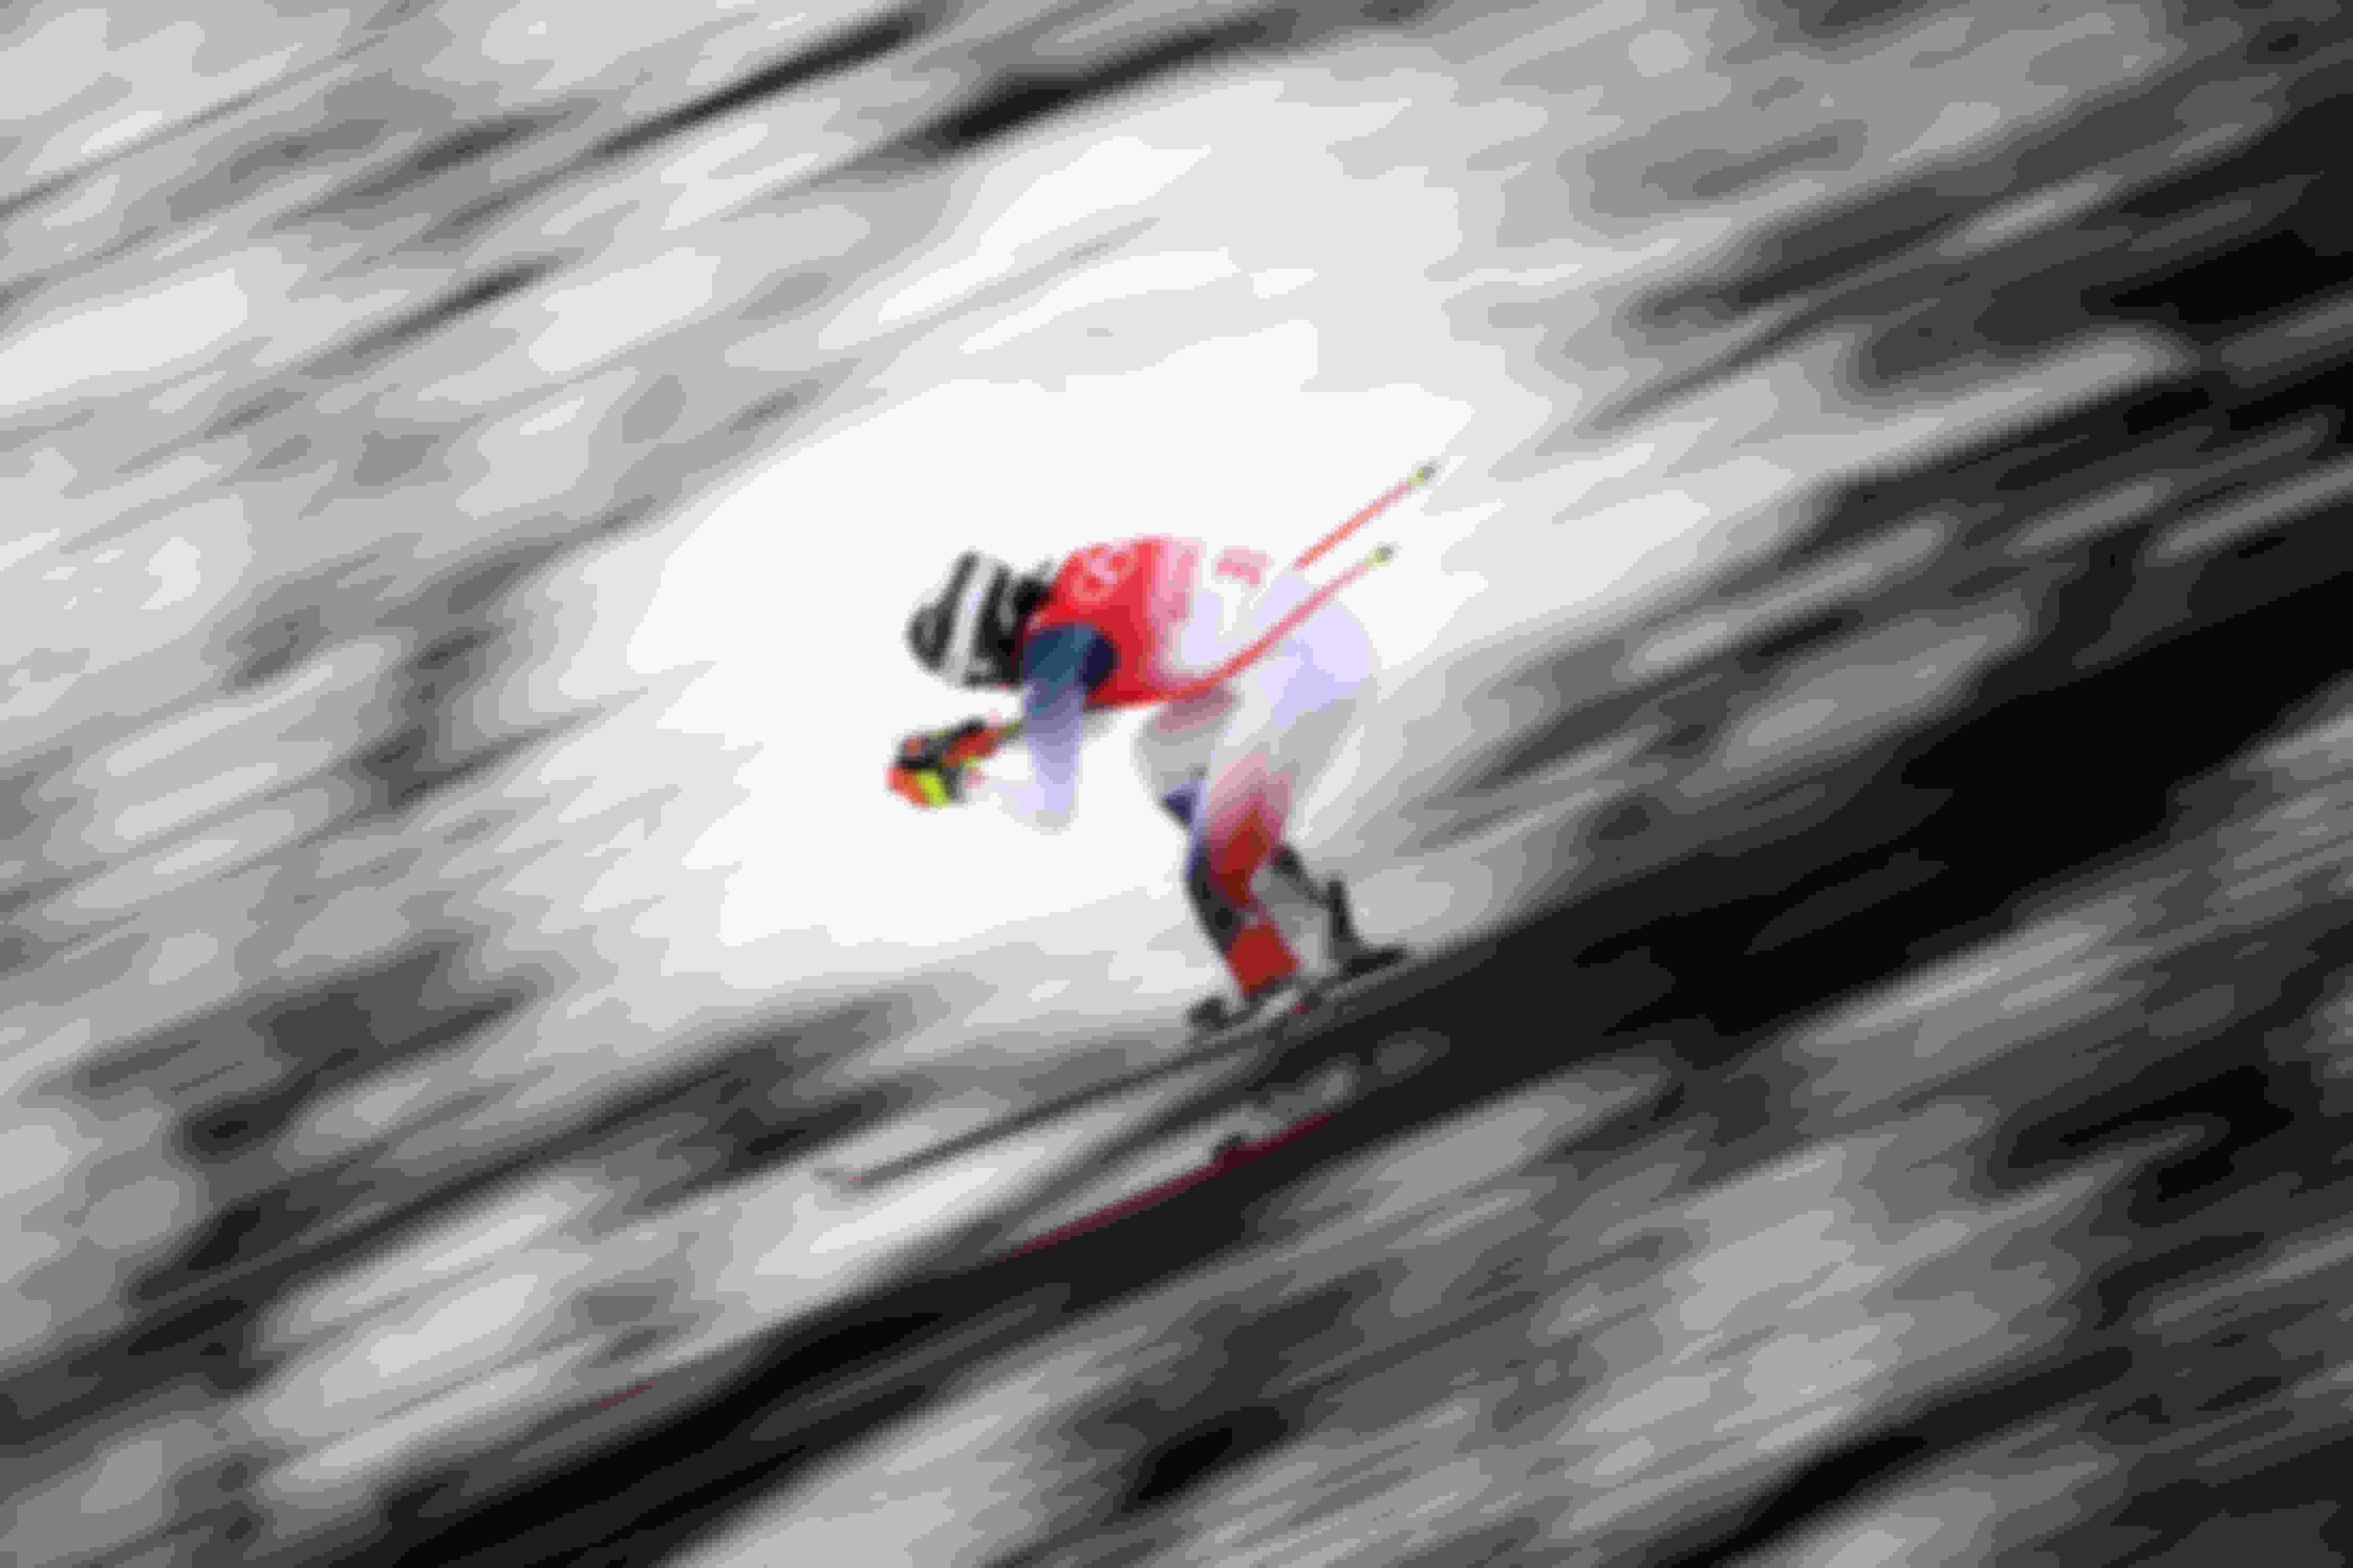 Keely Cashman of Team USA skis during the women's downhill 1st training